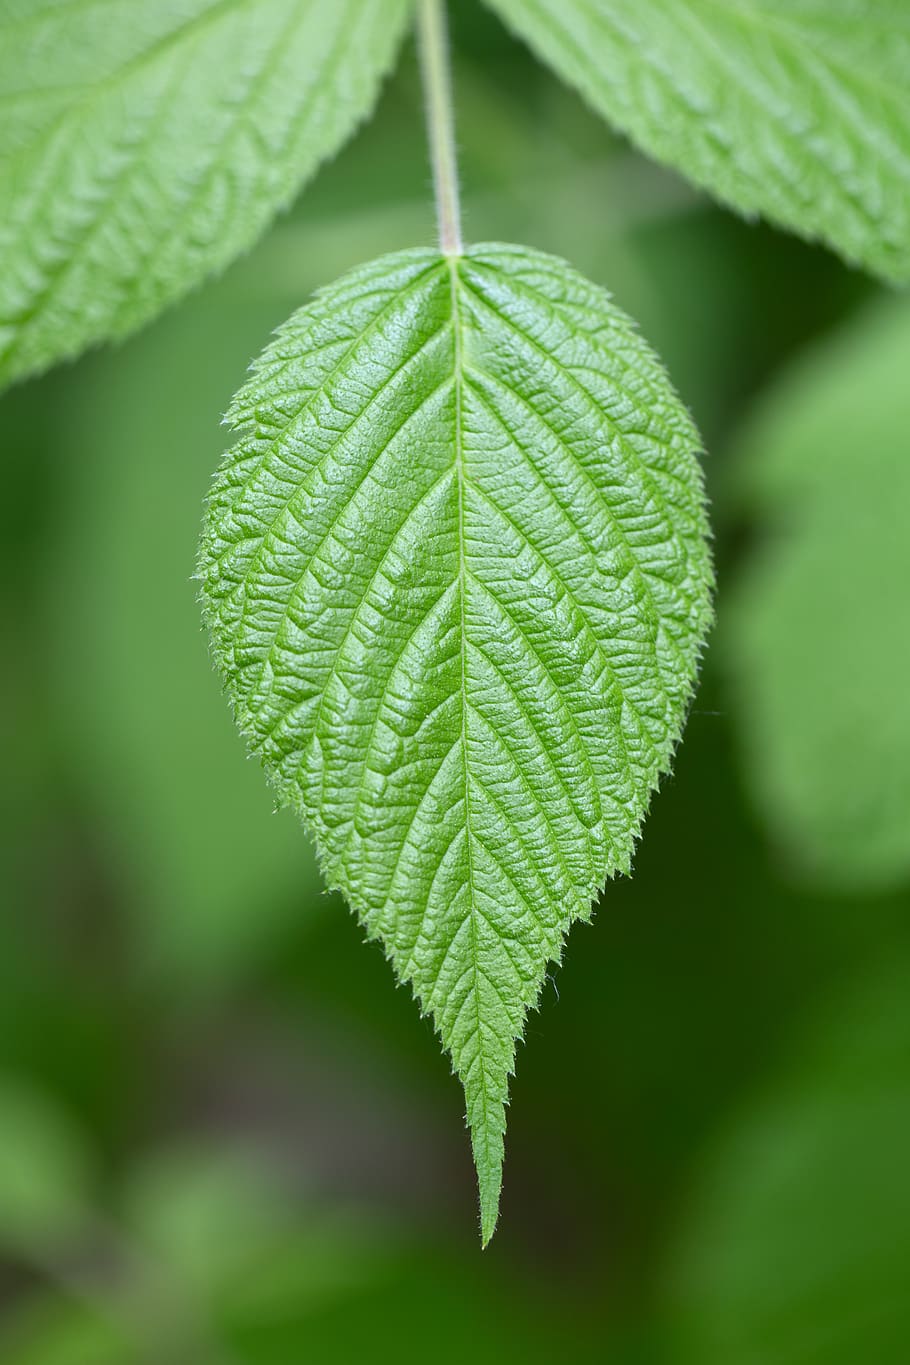 macro, plant, leaf, natural, texture, nature, leaves, green, background, growth